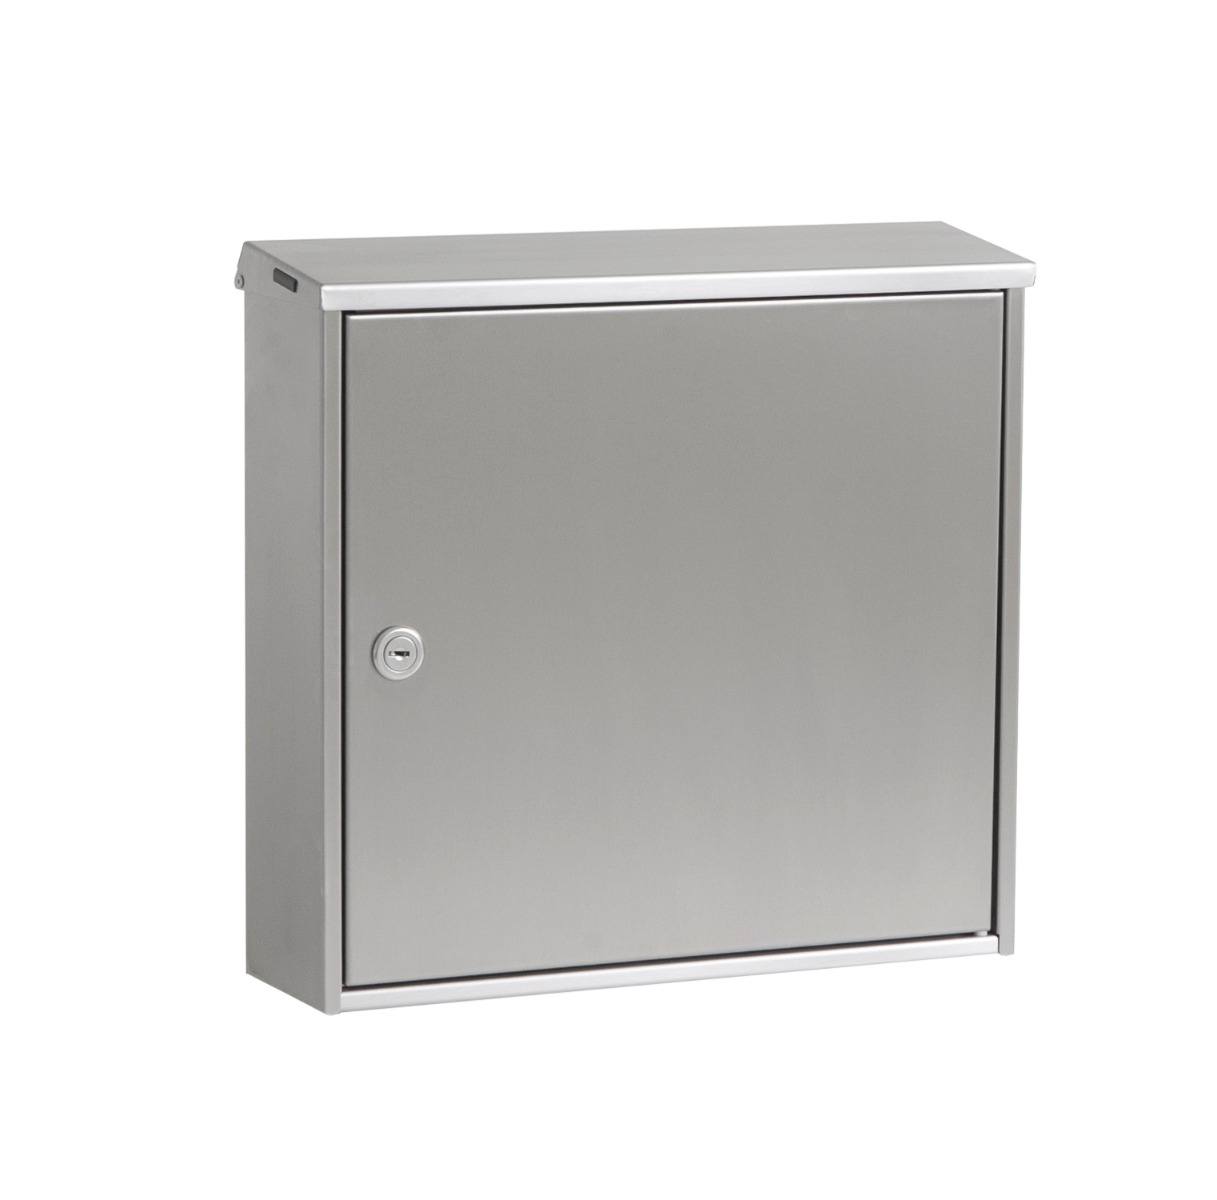 Knobloch Chicago Locking Surface Mount Mailbox in Brushed Stainless Steel